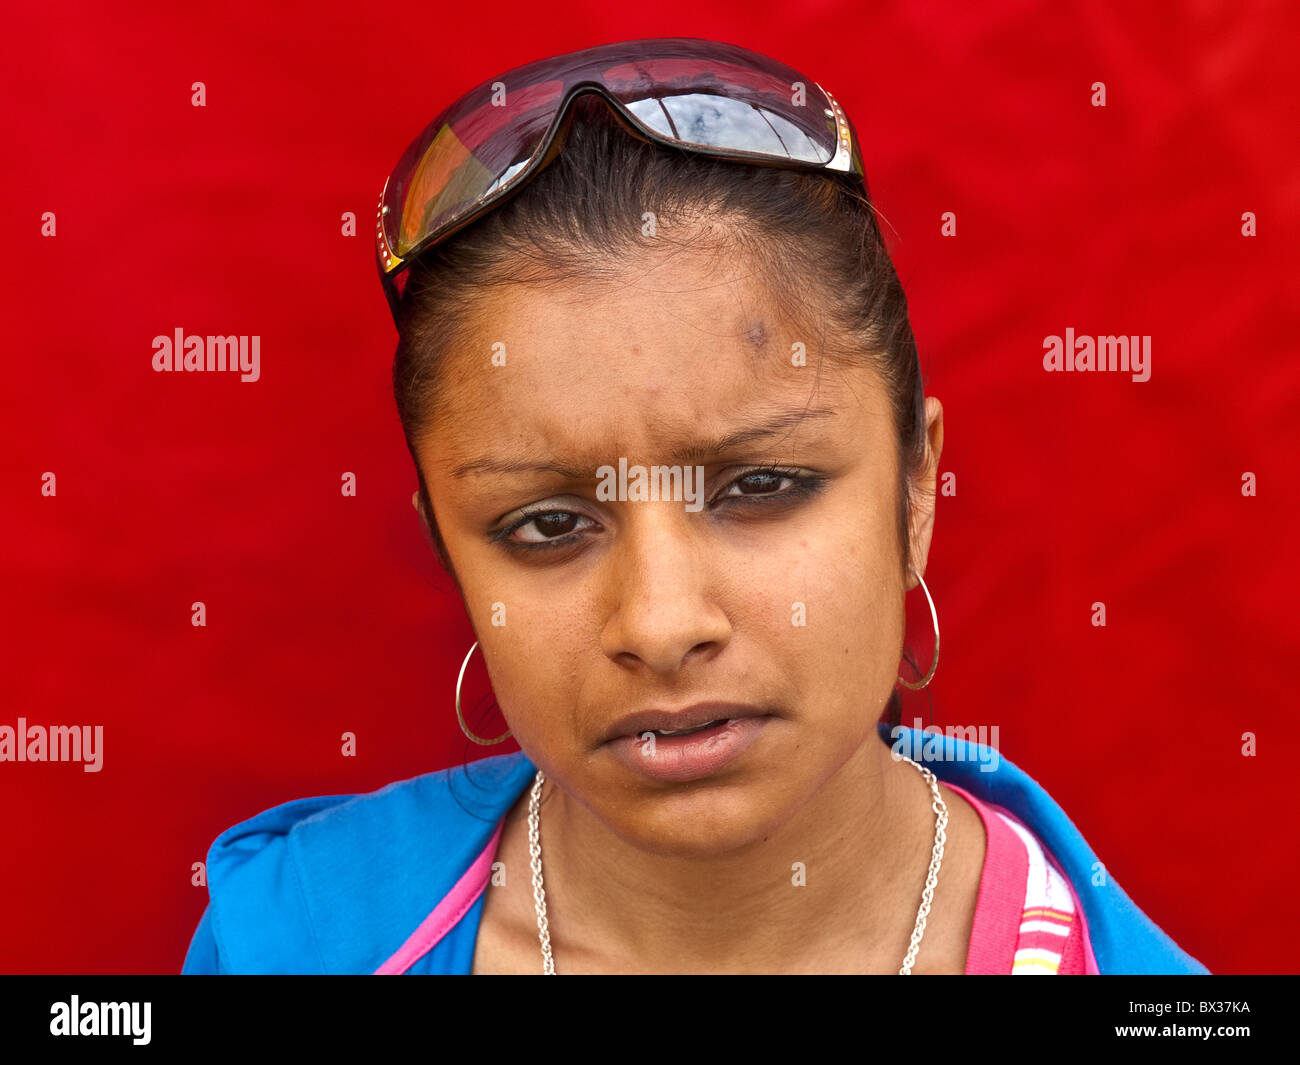 Portrait of Asian Girl wearing sunglasses on head serious (worried) expression against red background. Stock Photo